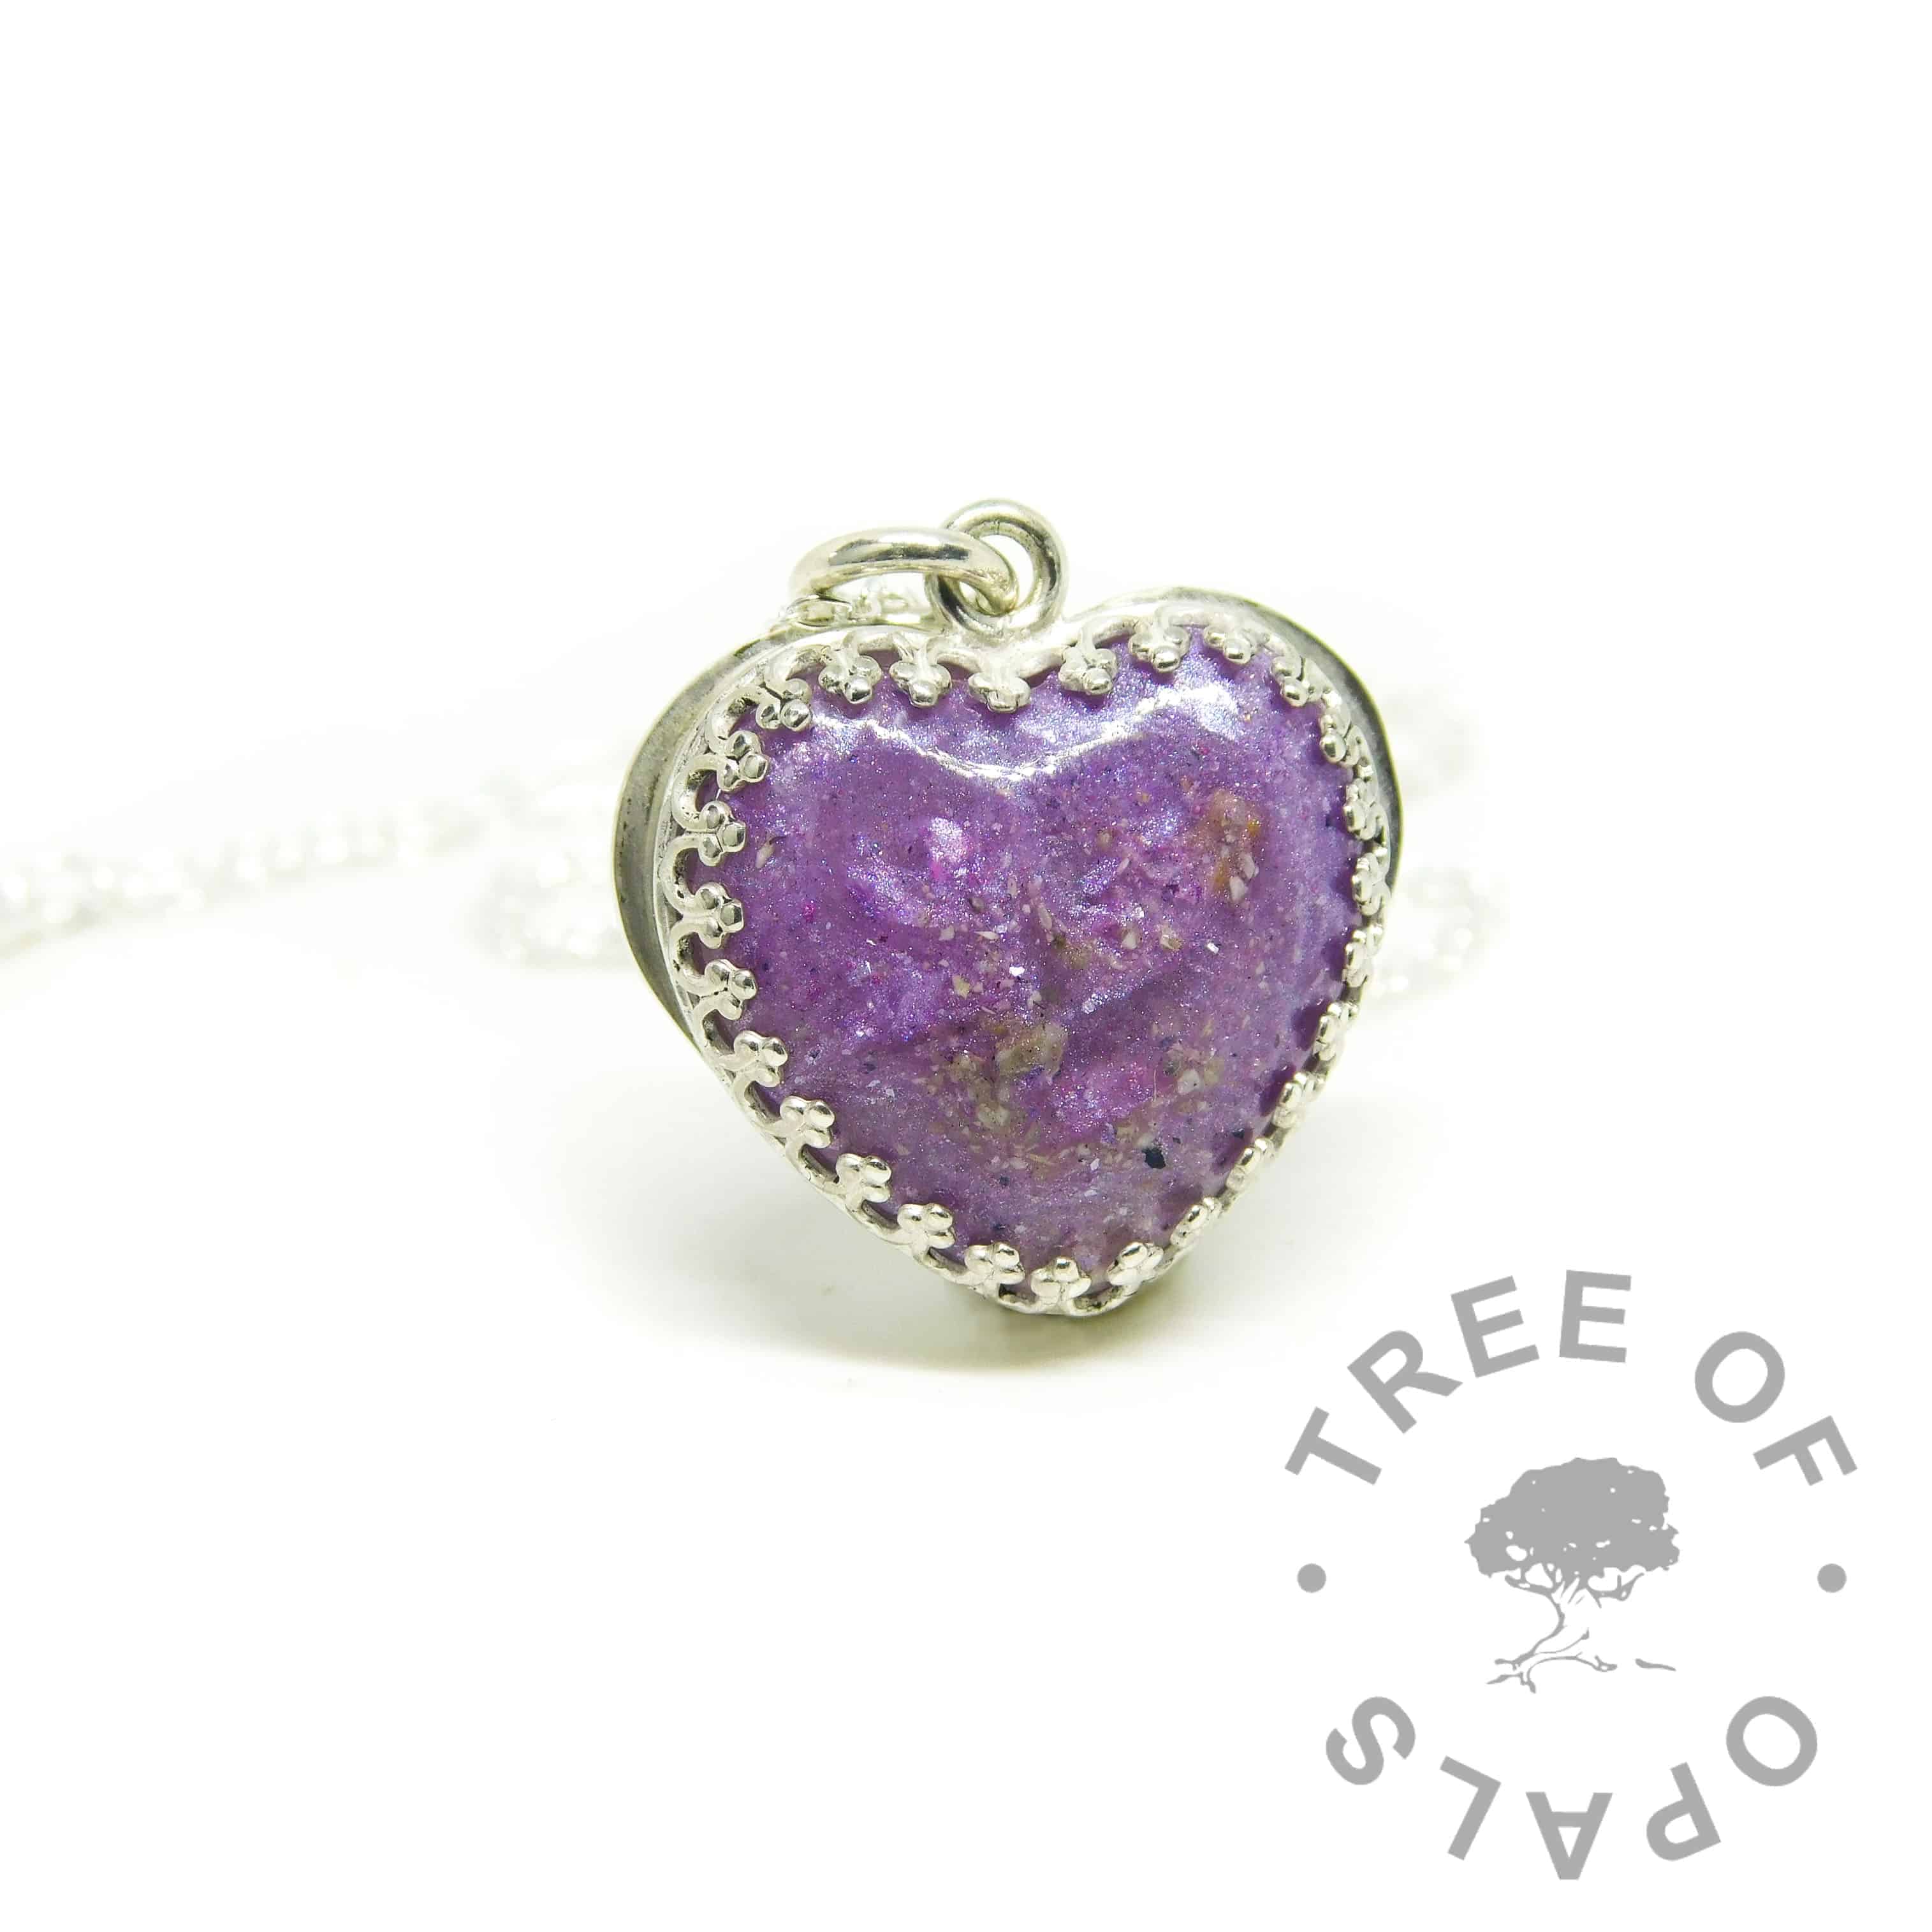 purple ashes heart necklace. Orchid purple resin sparkle mix and cremation ashes